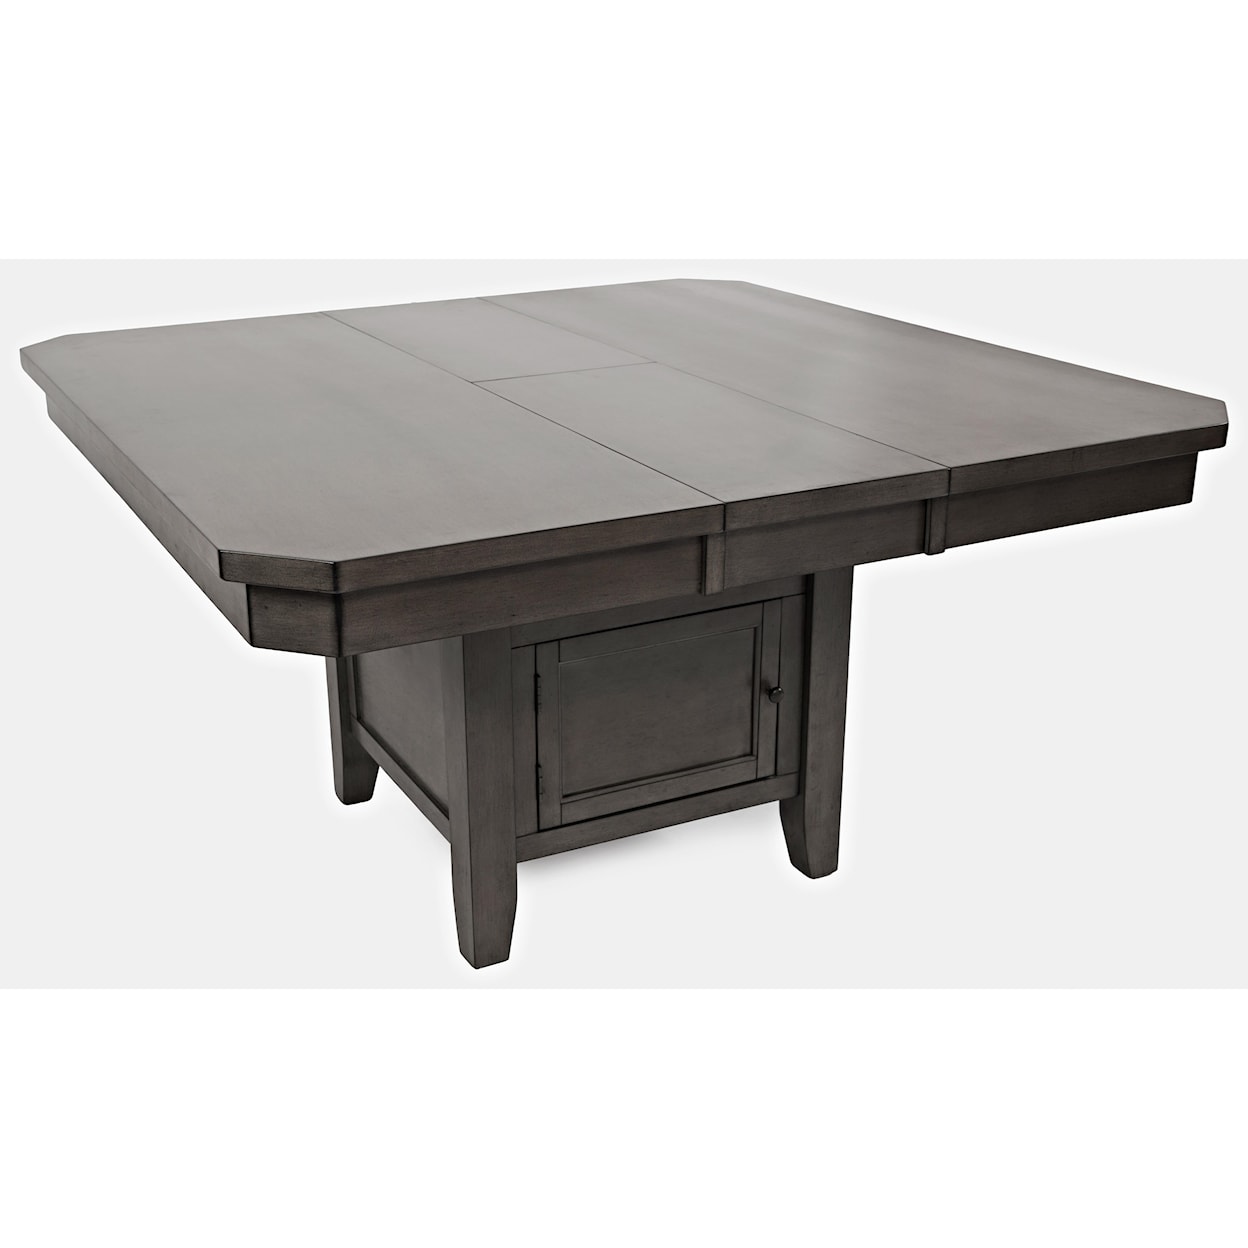 Jofran Manchester High/Low Square Dining Table